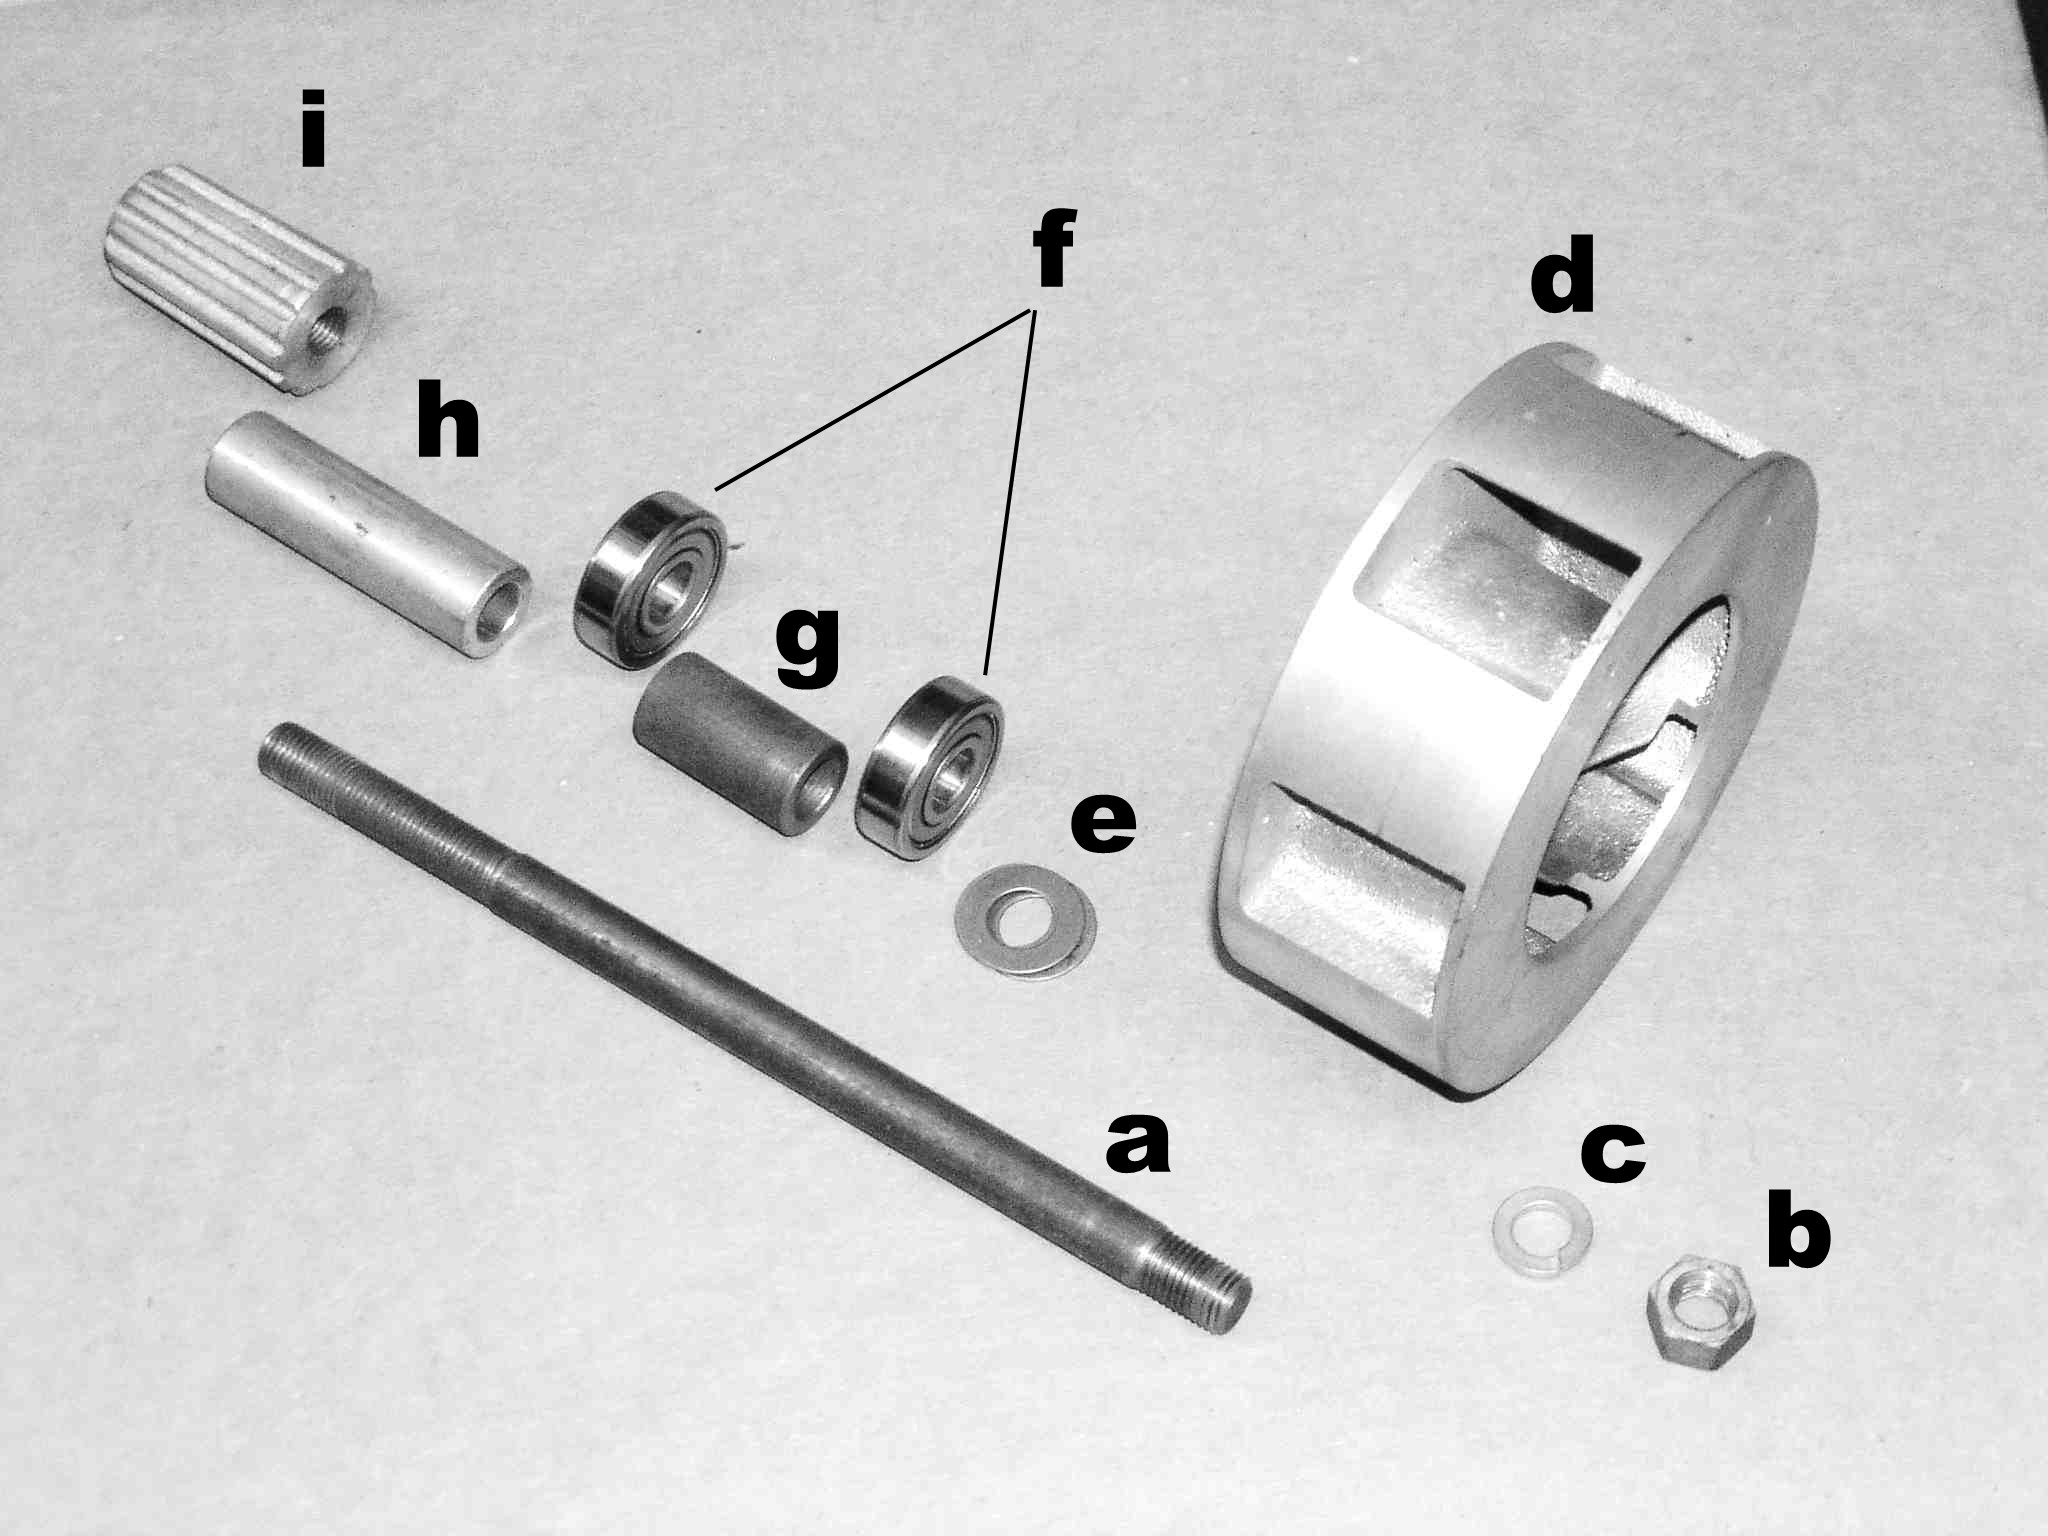 B&M Model MC Friction Drive Siren, exploded view. These sirens were mounted by some police departments on Moto Guzzi V700, V7 Special, Ambassador, 850 GT, 850 GT California, Eldorado, and 850 California Police motorcycles.